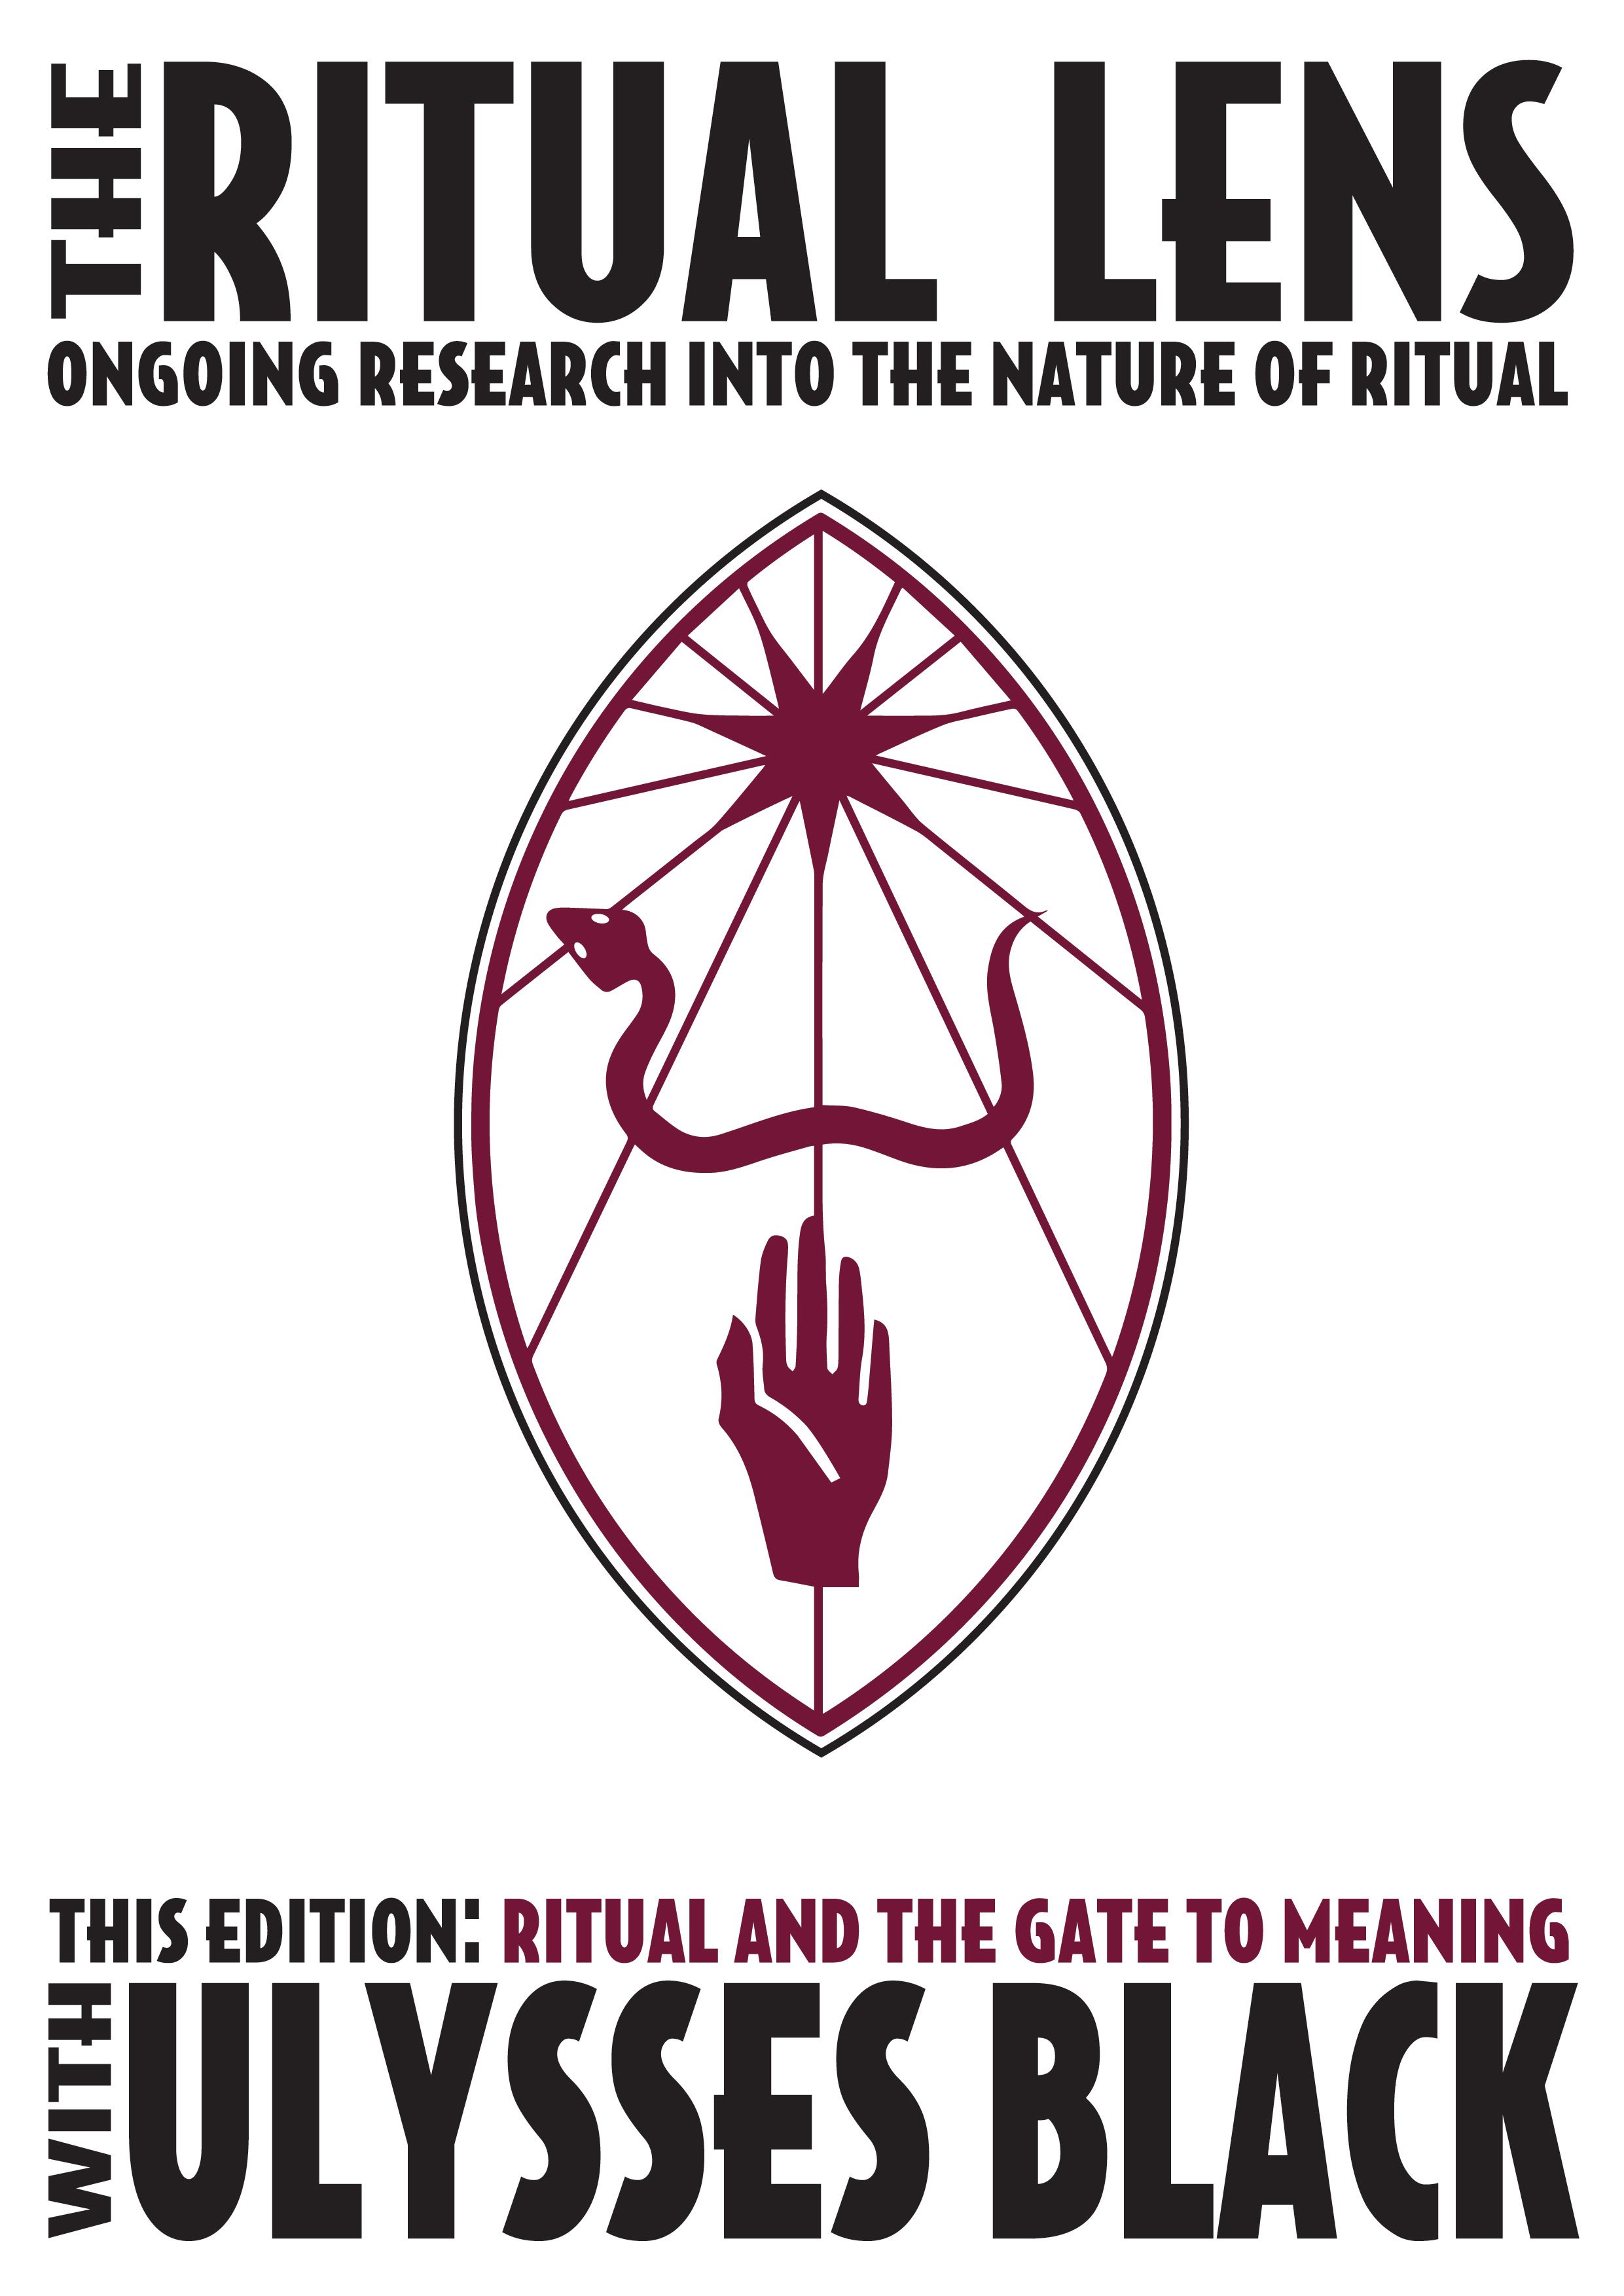 2020: The Ritual Lens: Gate to Meaning